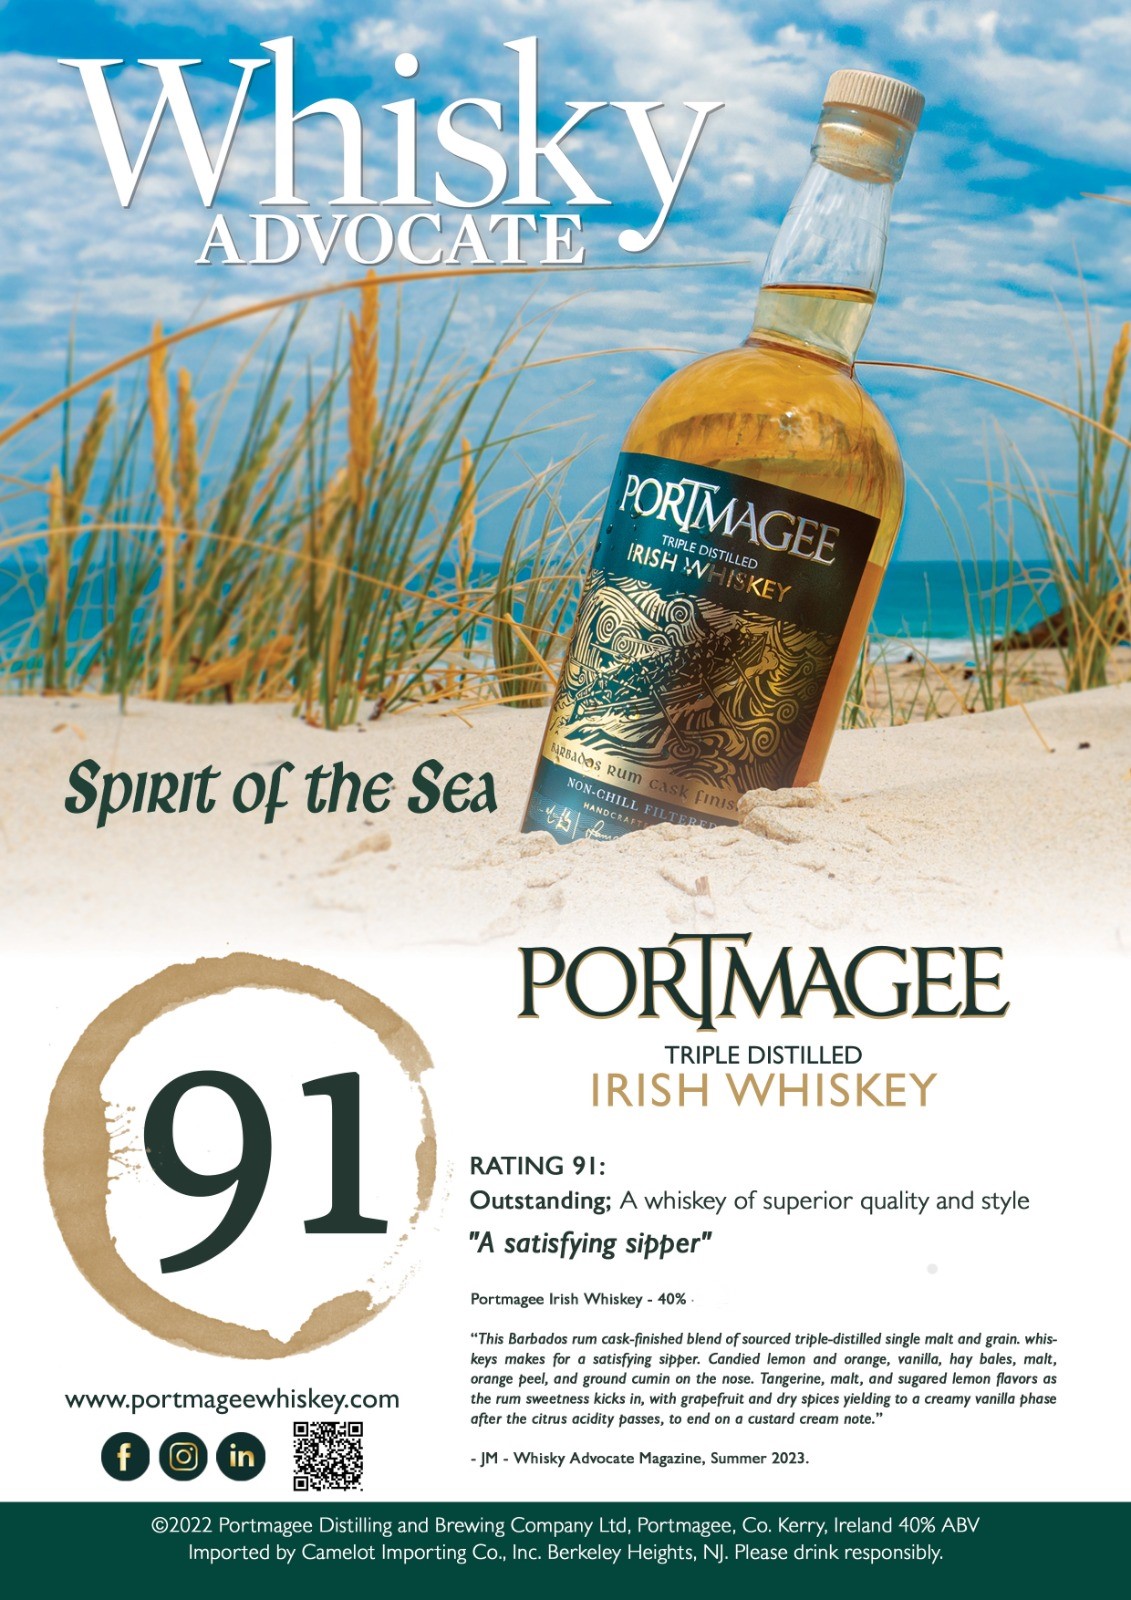 Portmagee Small Batch Irish Whiskey. An exceptional and outstanding Irish Whiskey. 91% Whisky Advocate Magazine.